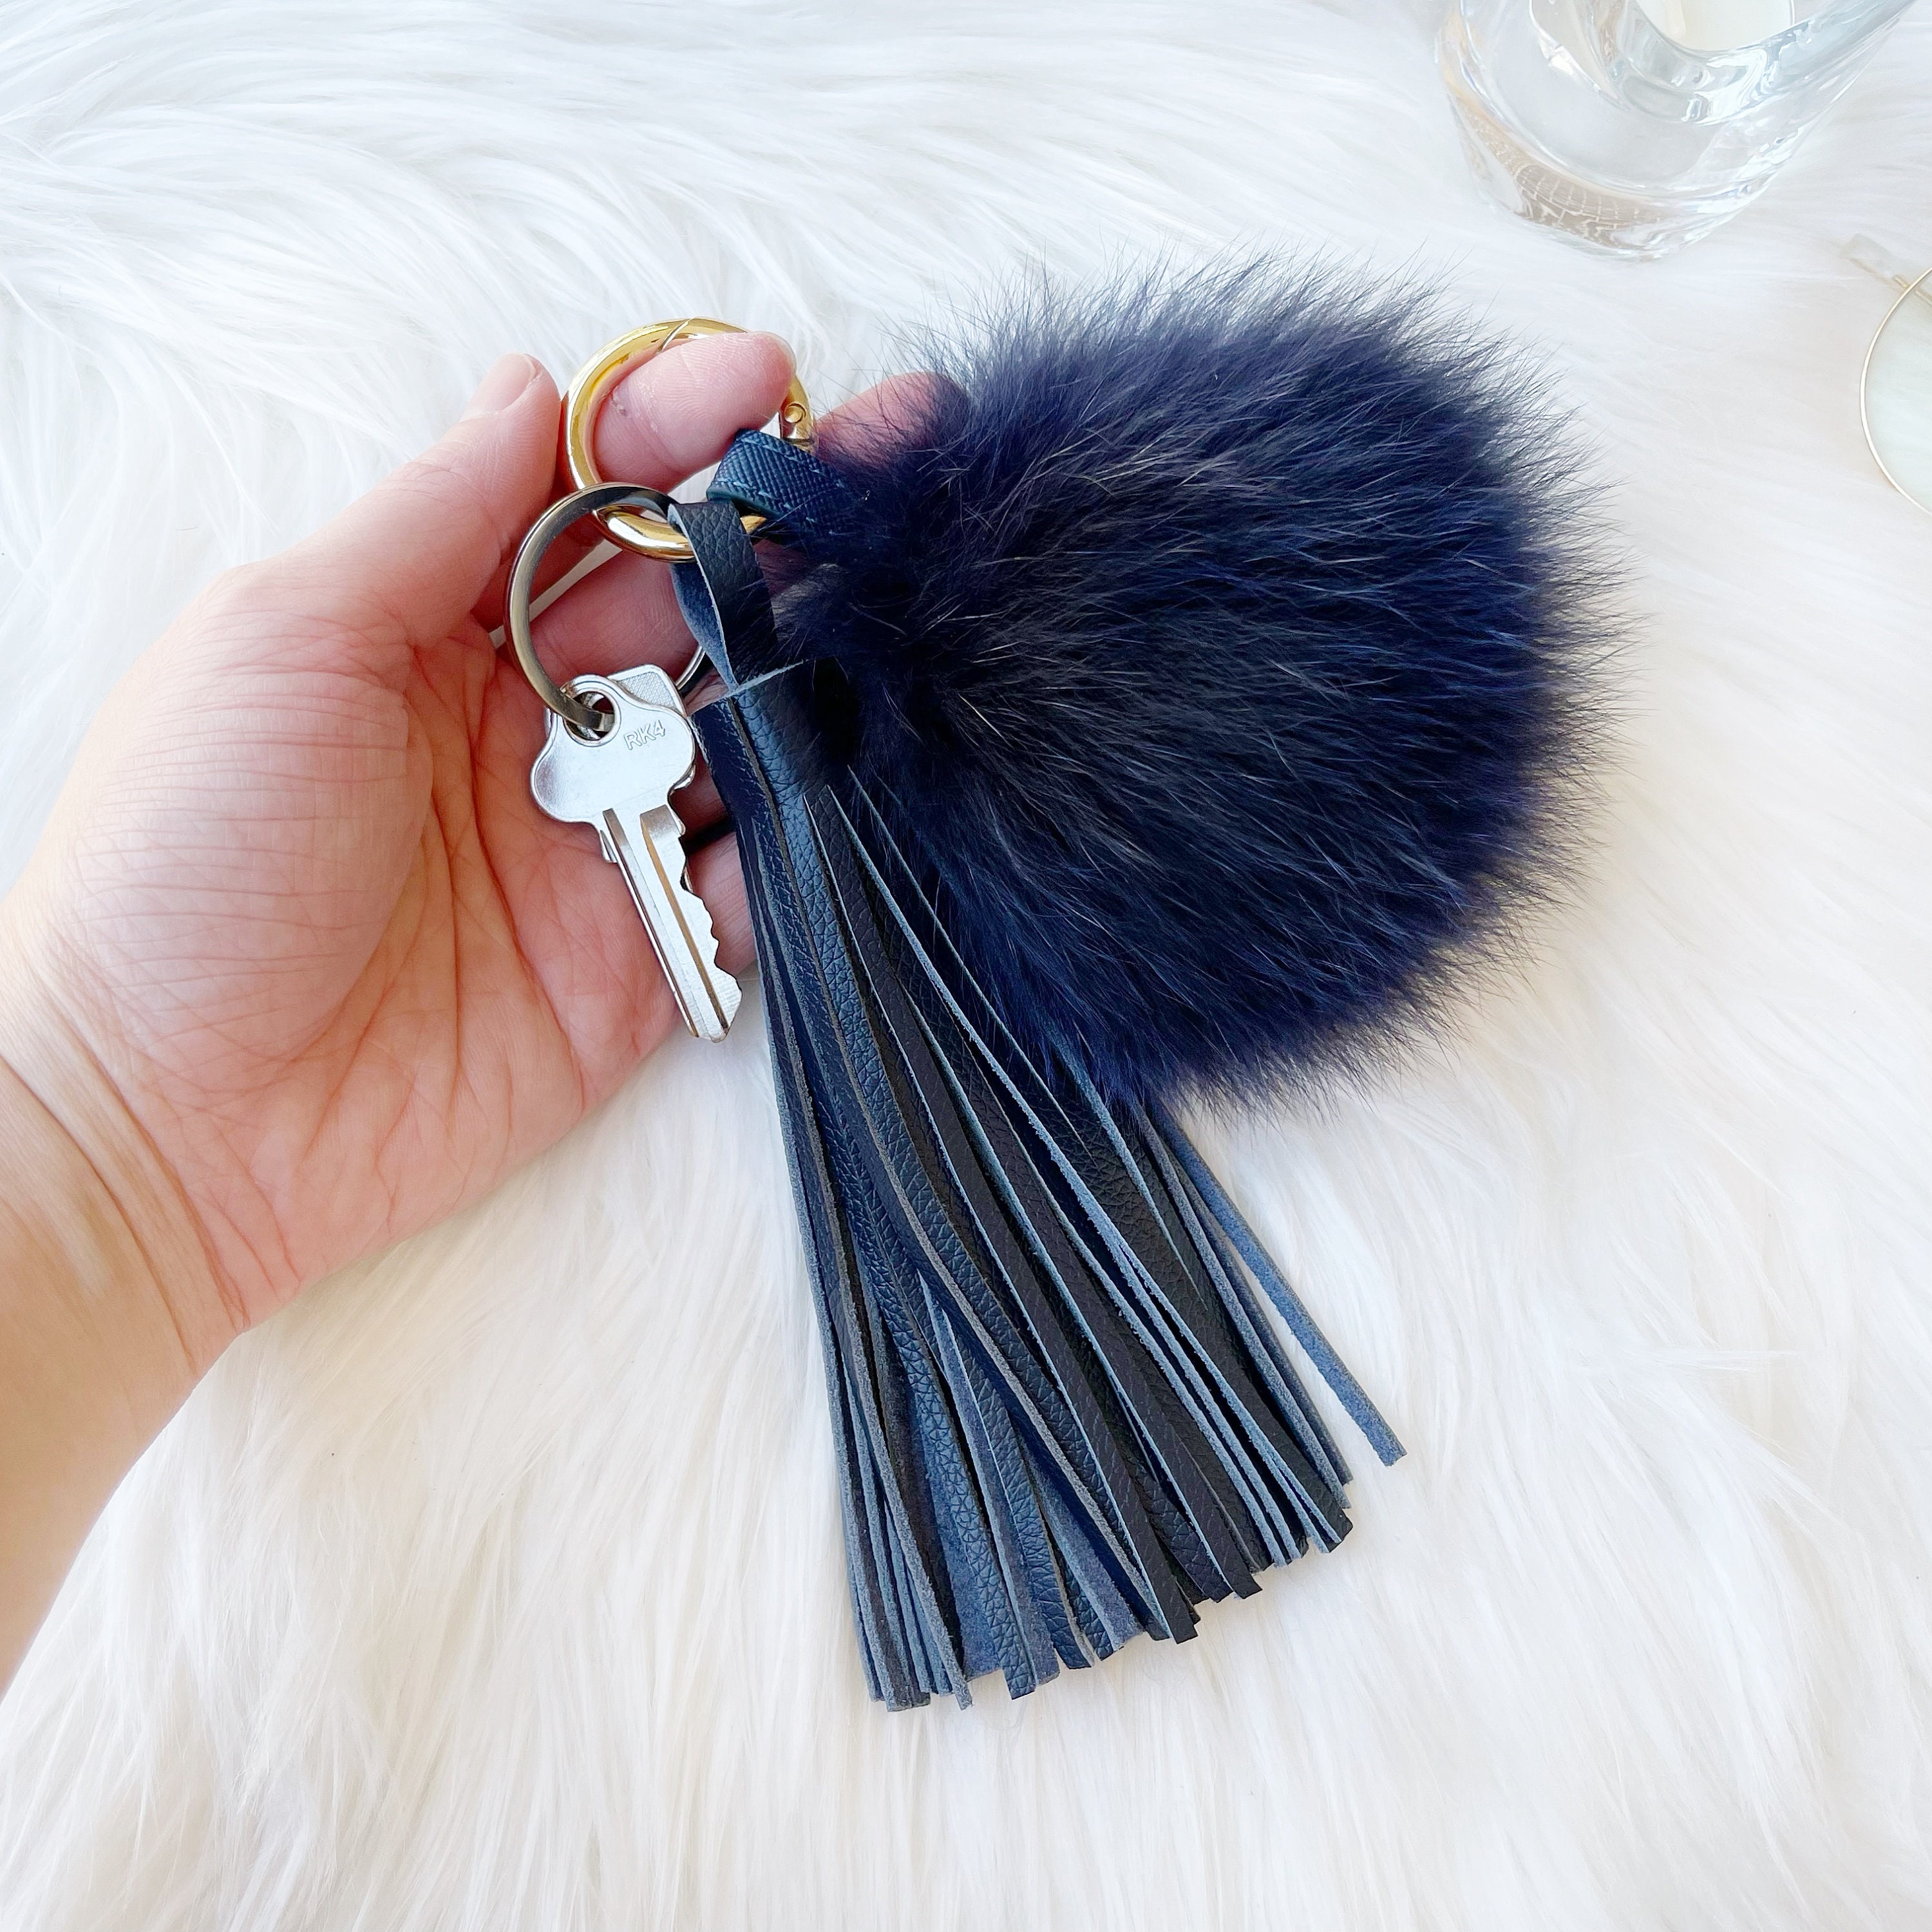 HINZIC 8pcs Cow Leather Tassel Keychains, 6.69'' Black White Long Tassel Keychain with Gold Circle Lobster Clasp Key Ring Decorative for Purse